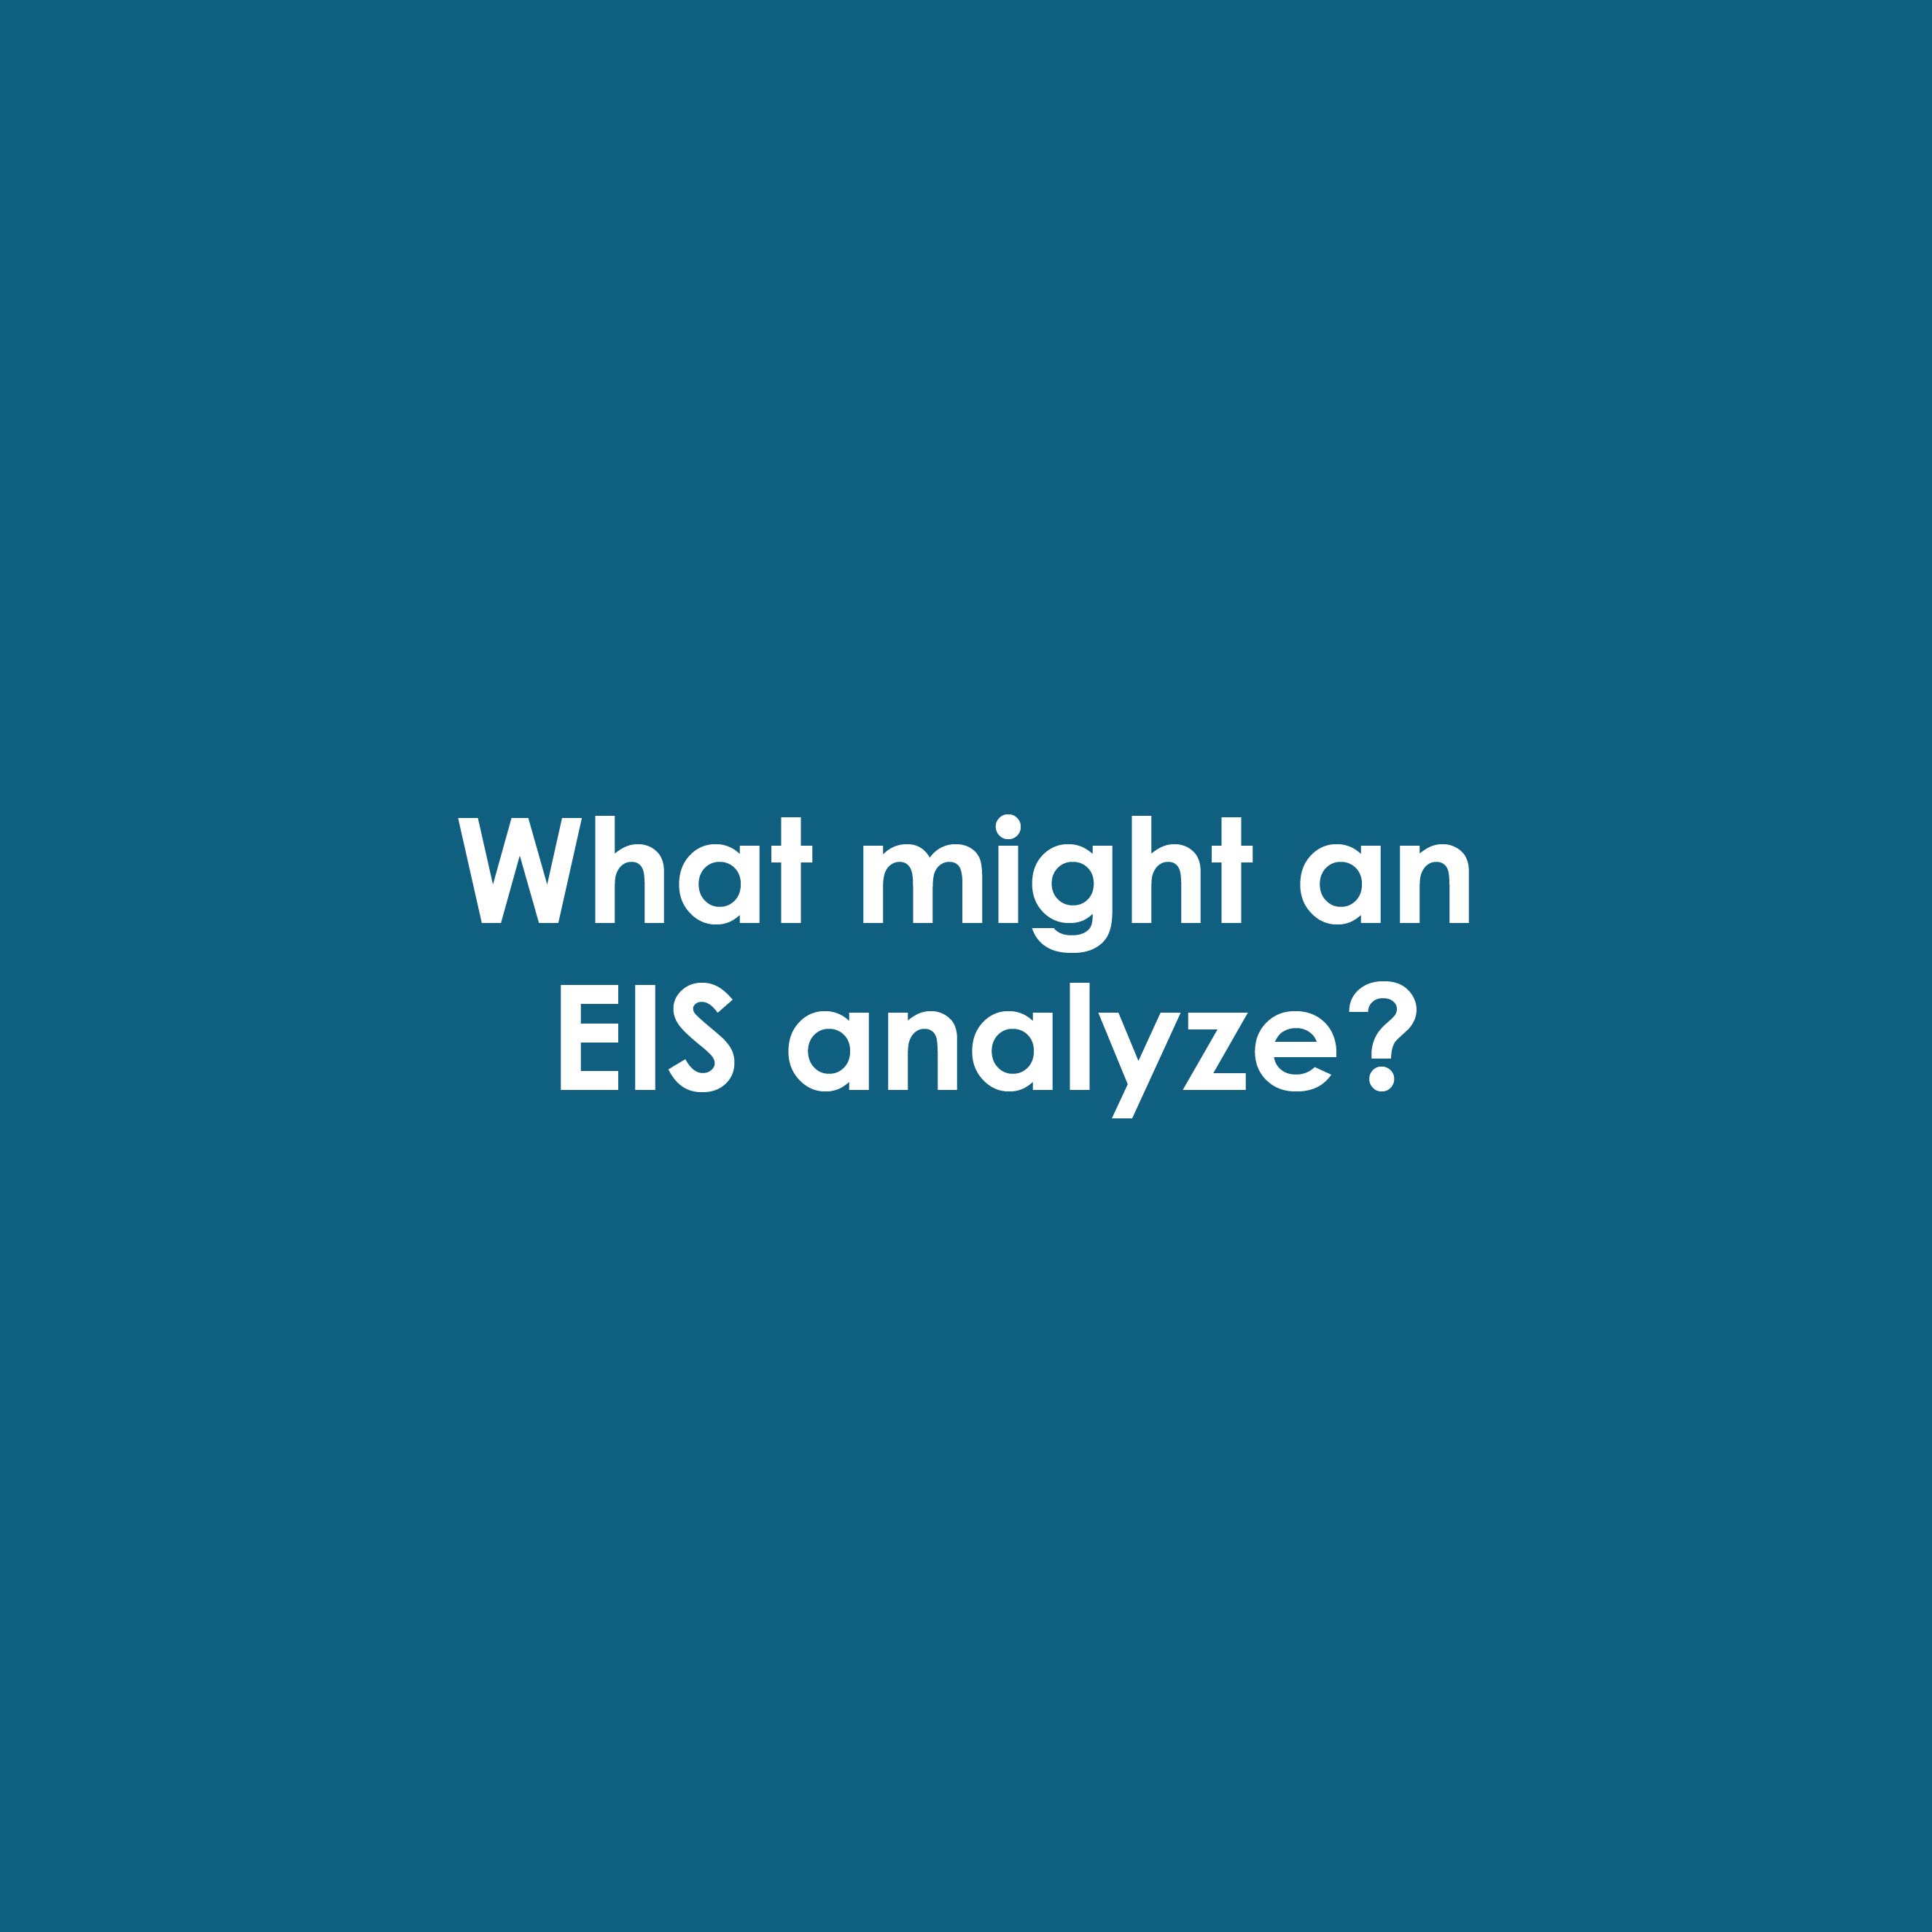 What might an EIS analyze?